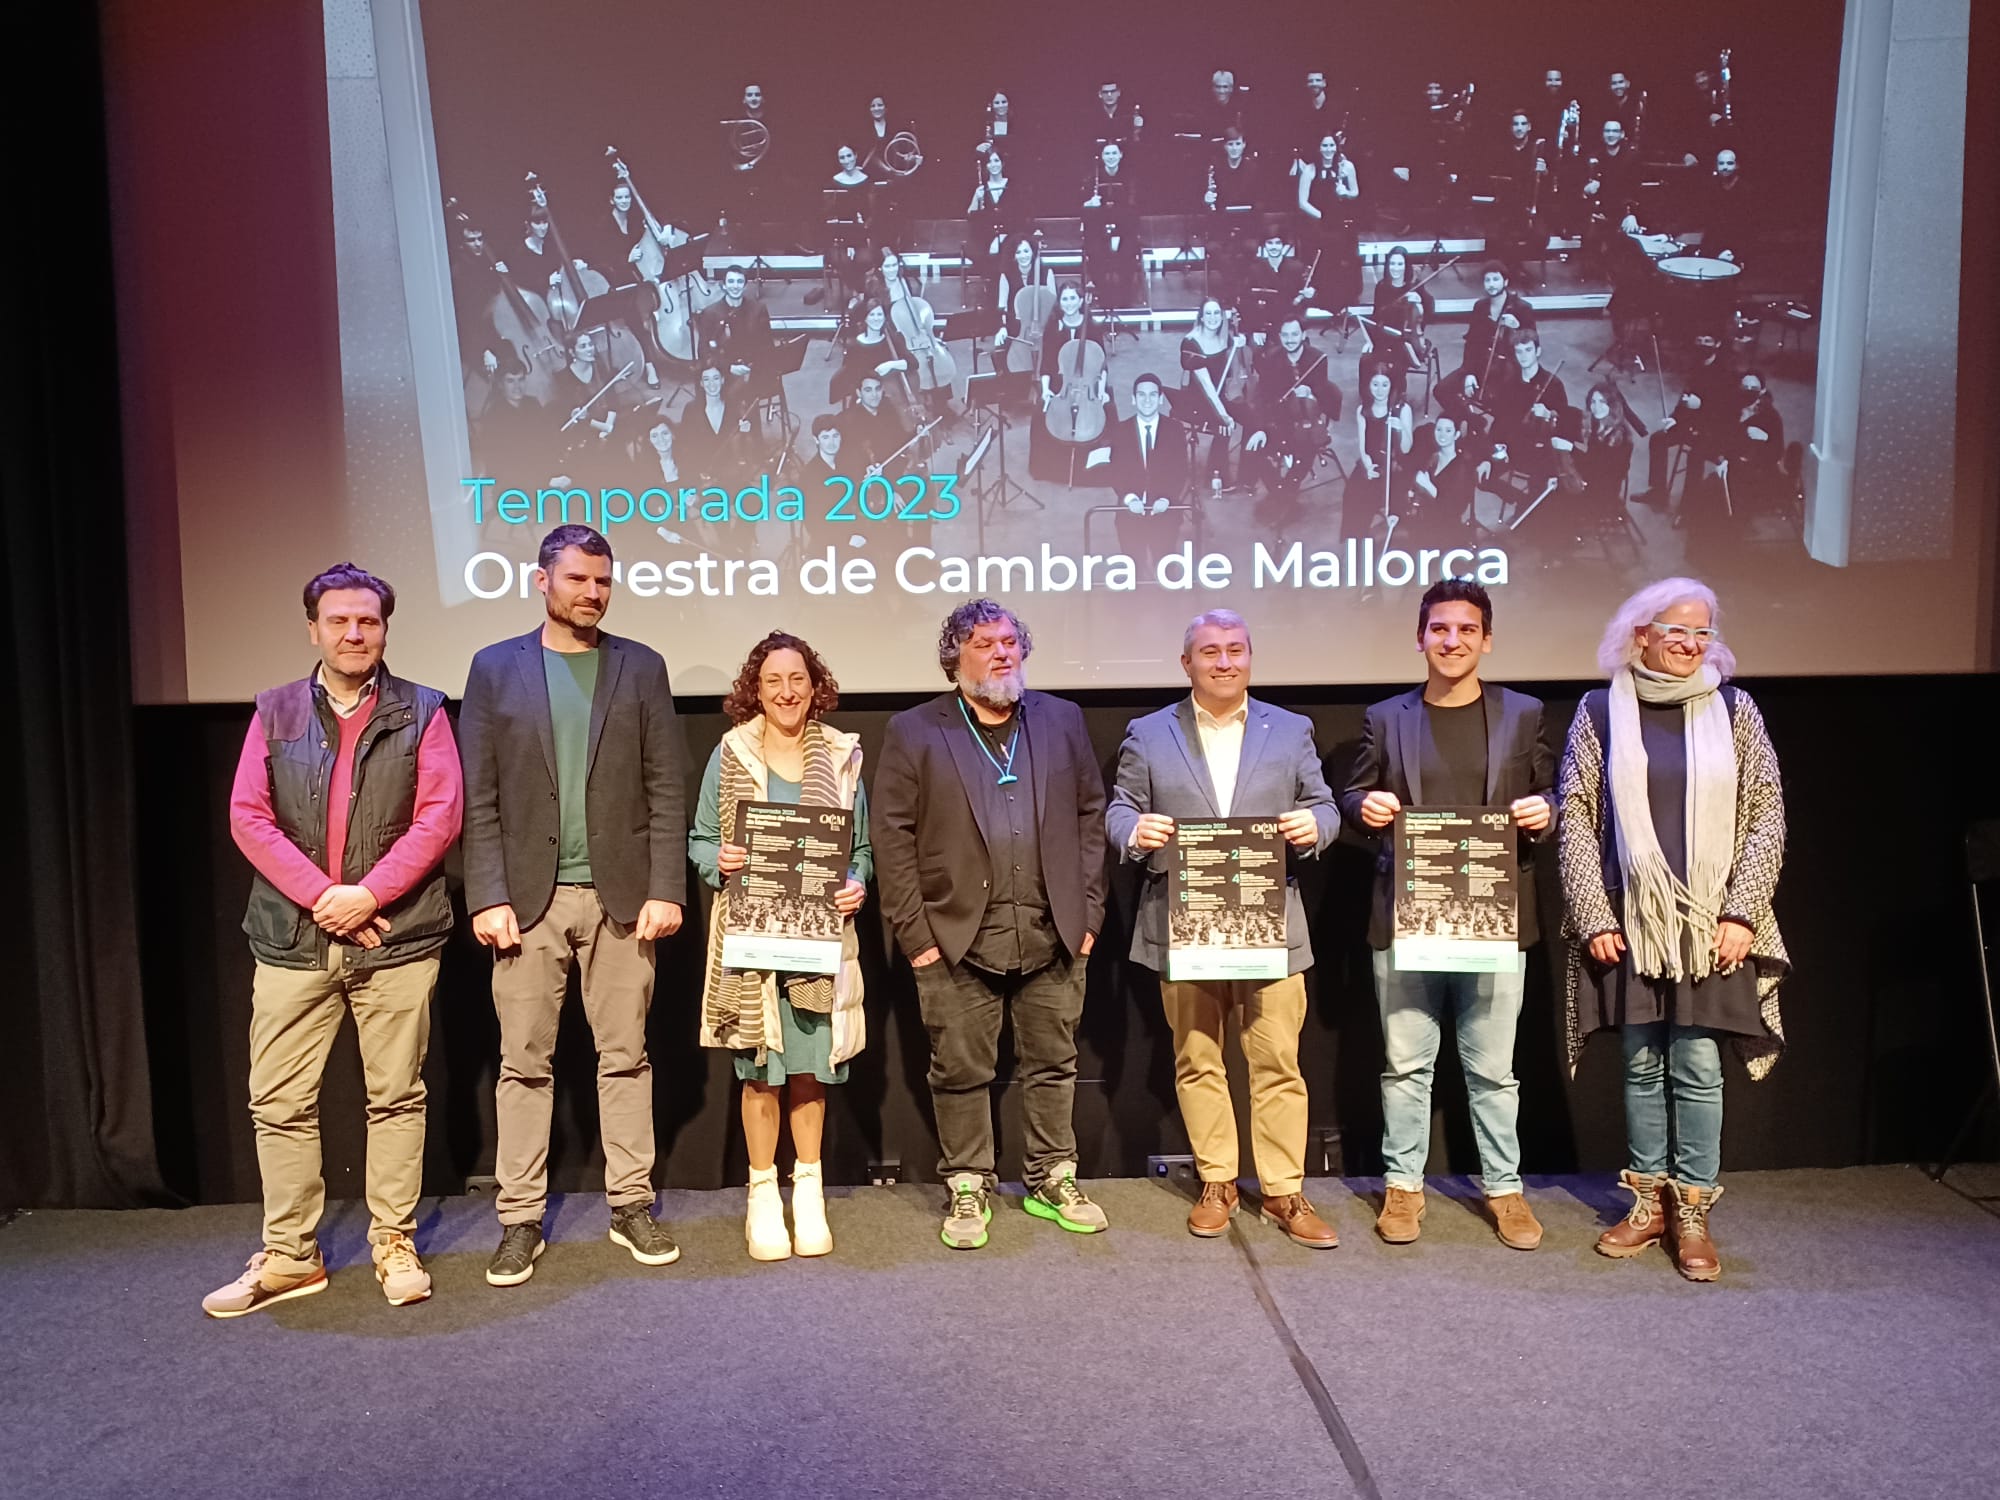 The Chamber Orchestra of Mallorca